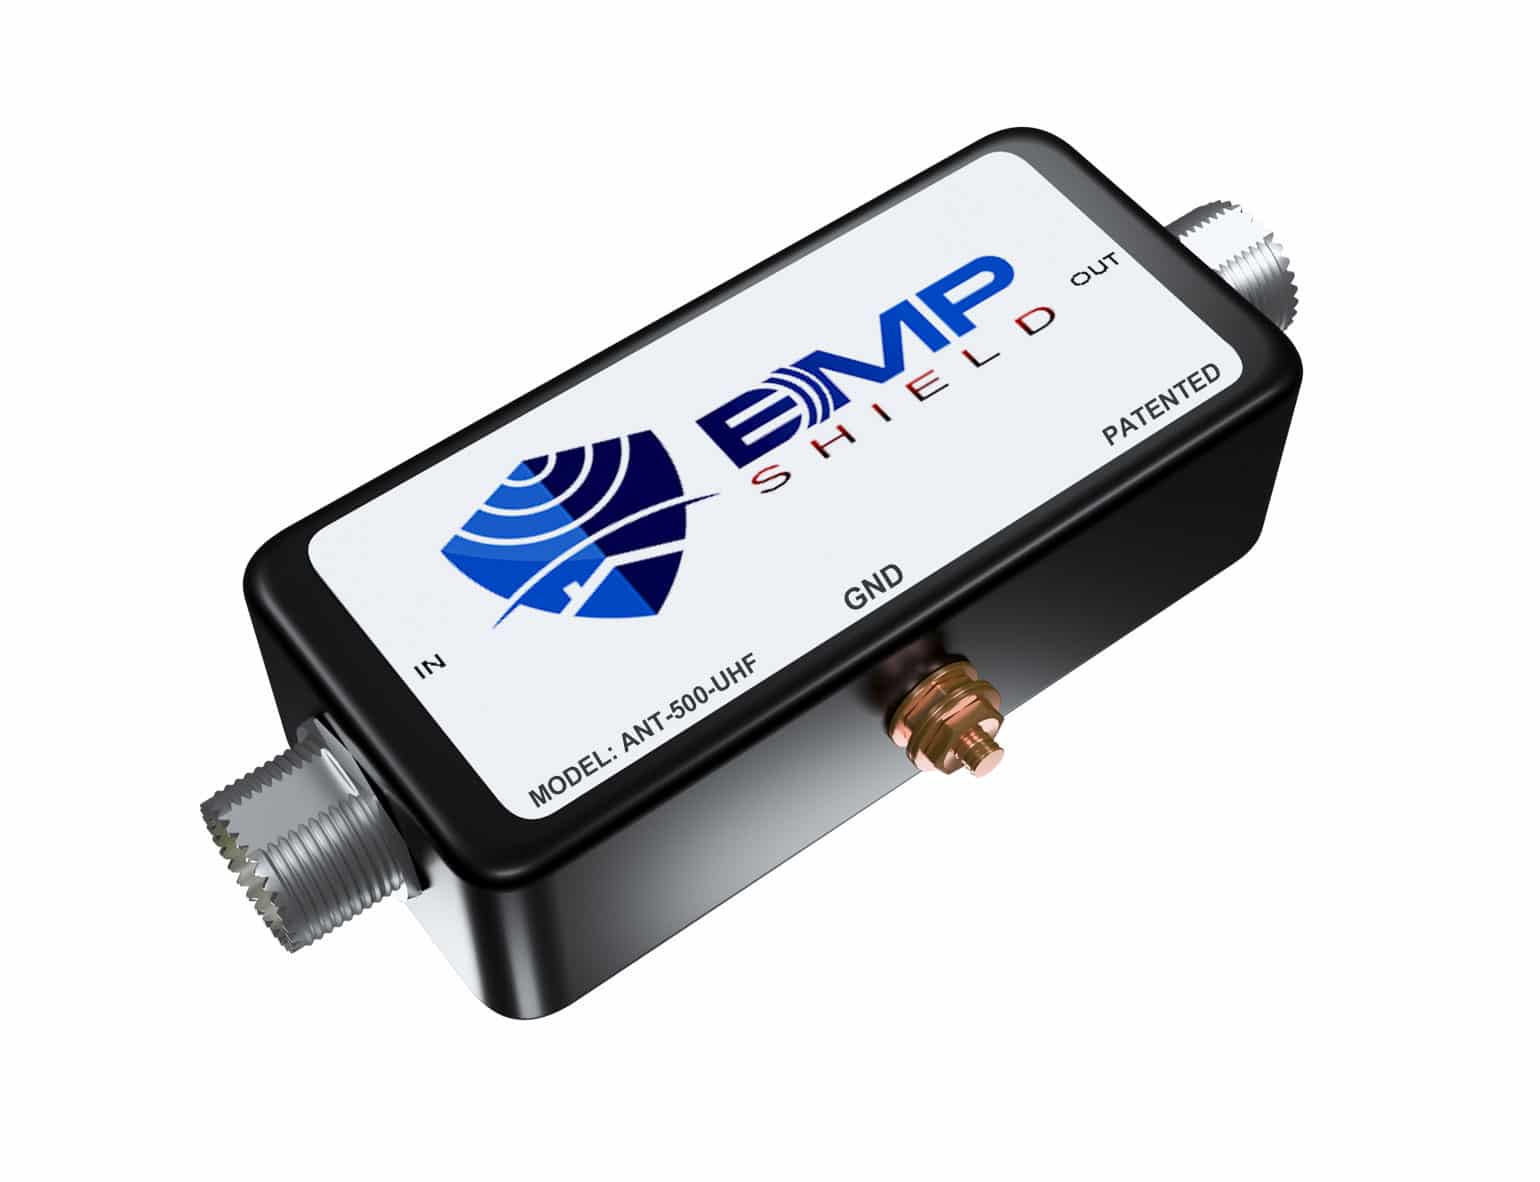 EMP Shield Radio and HF/VHF/UHF EMP Protection up to 500 Watts with UHF-Connectors.